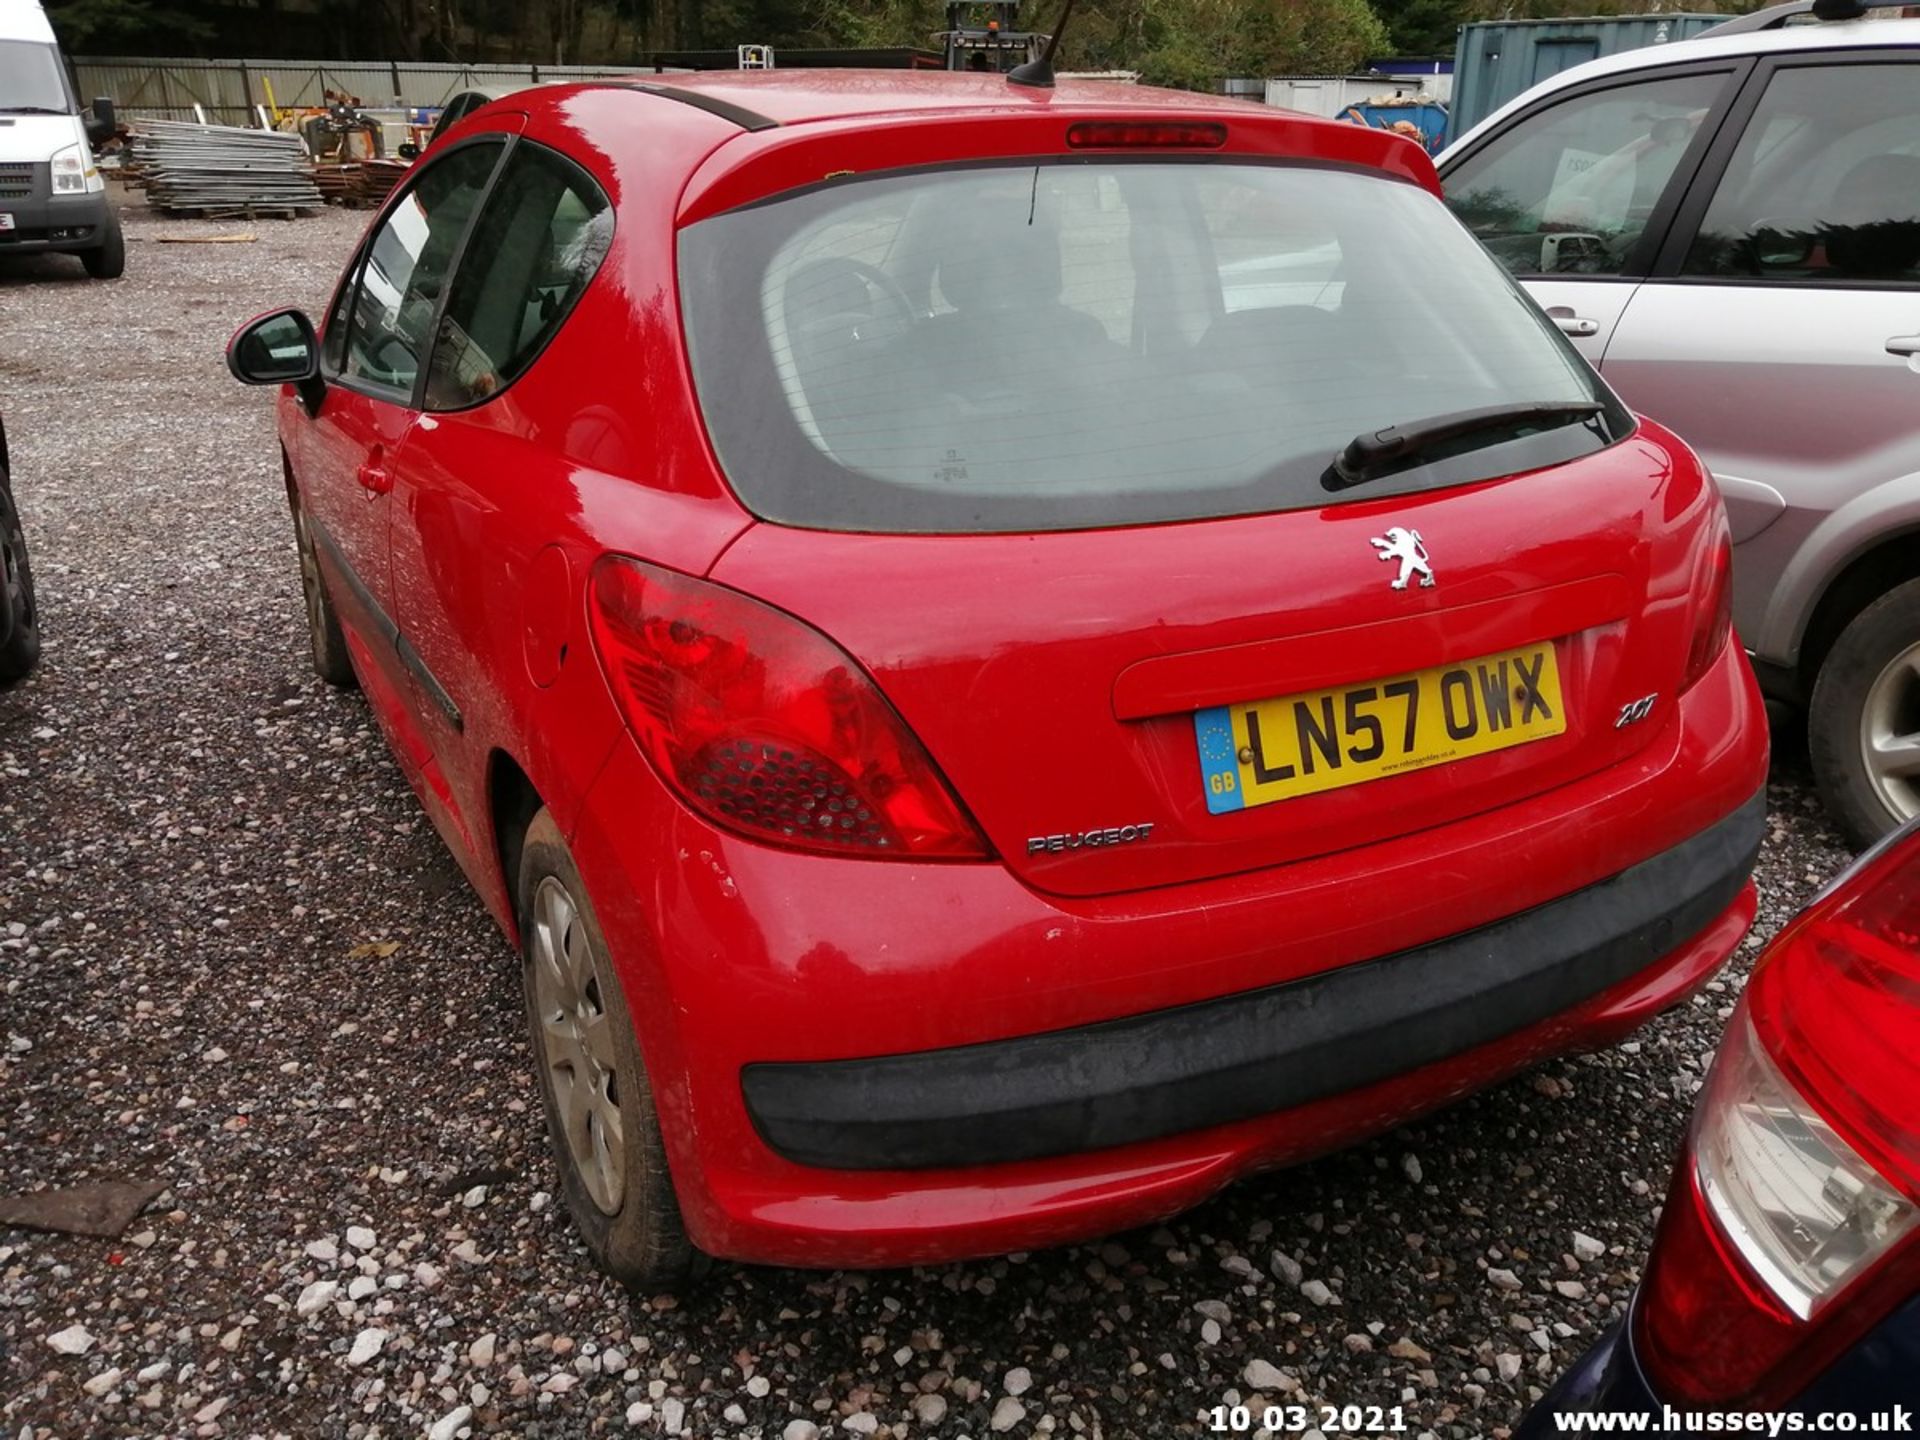 07/57 PEUGEOT 207 S HDI 67 - 1398cc 3dr Hatchback (Red) - Image 4 of 11